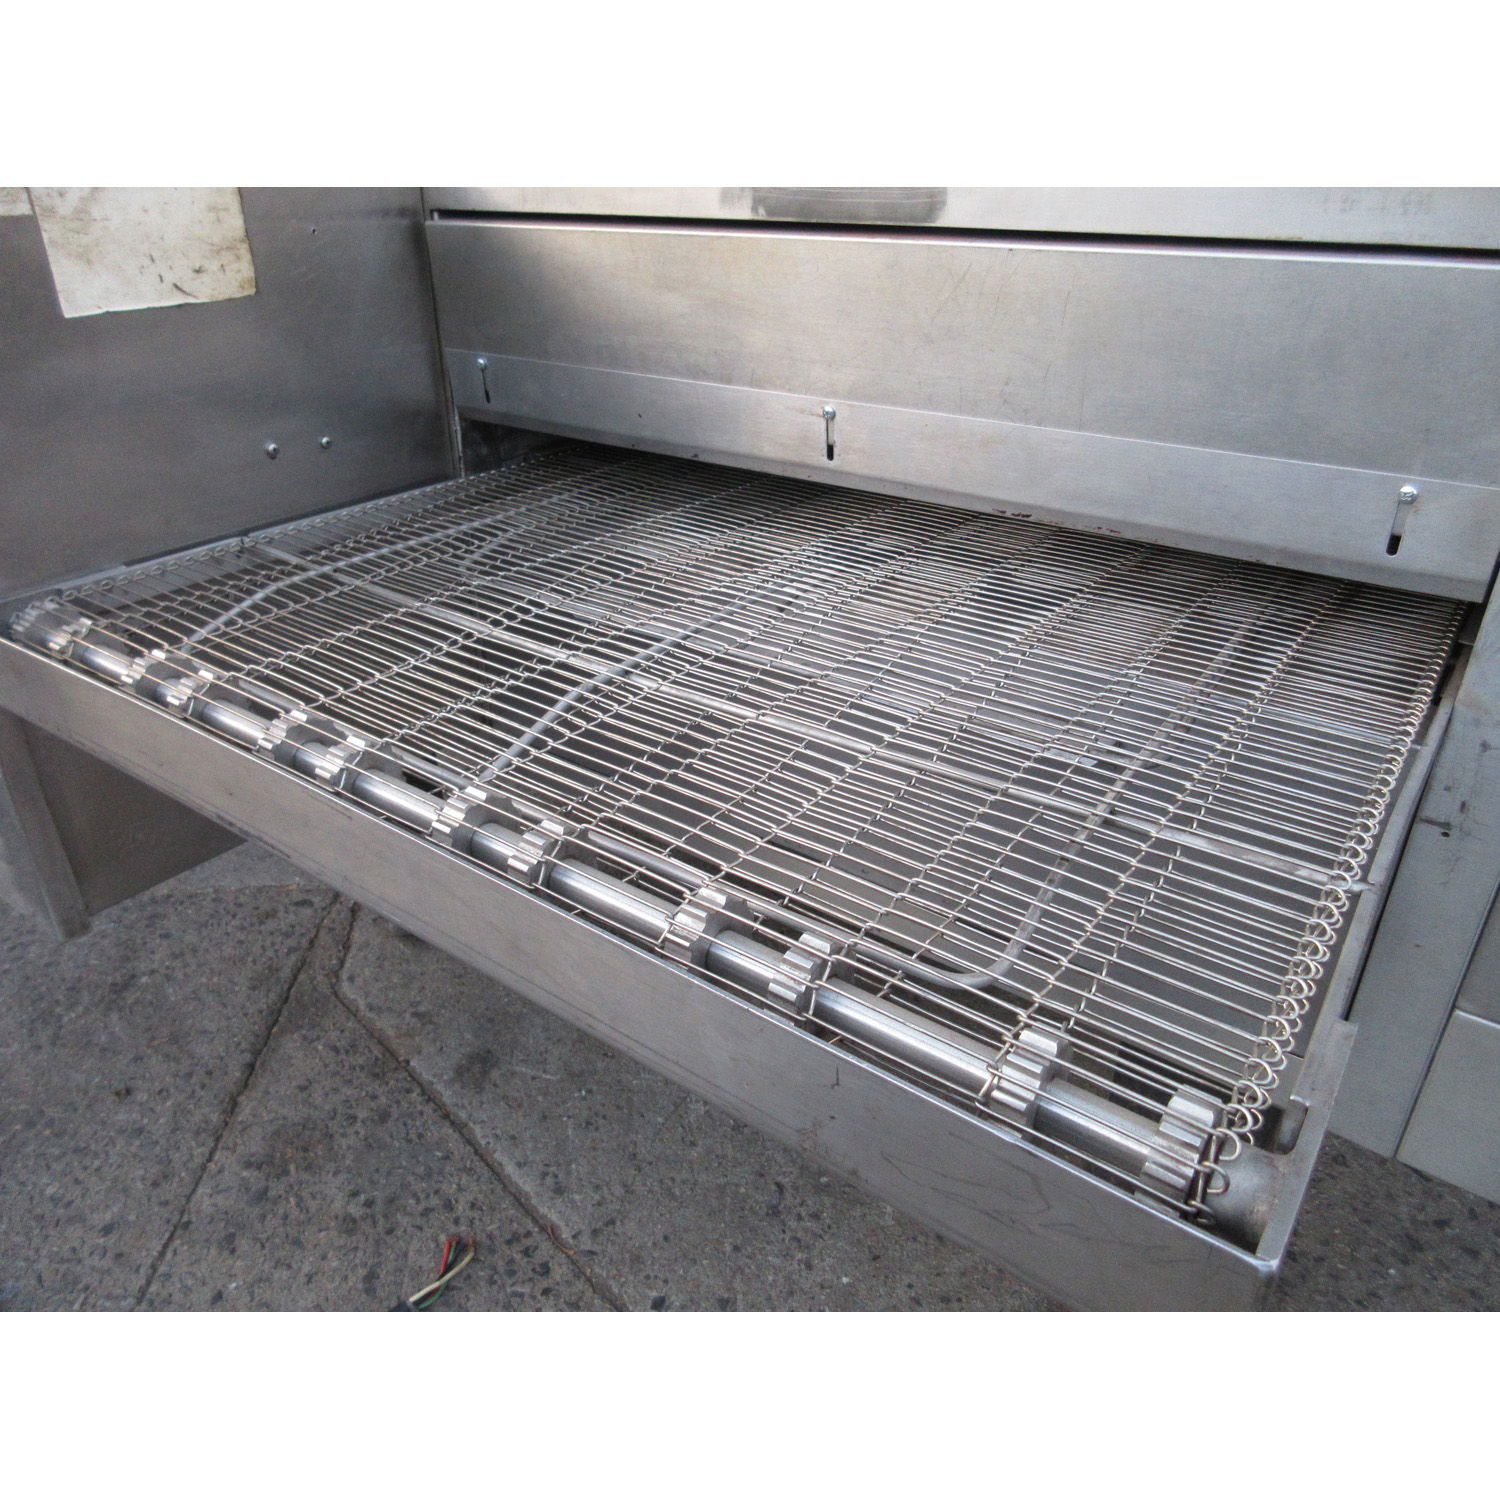 Blodgett MT70PH Conveyer Oven, Gas, Used Excellent Condition image 2